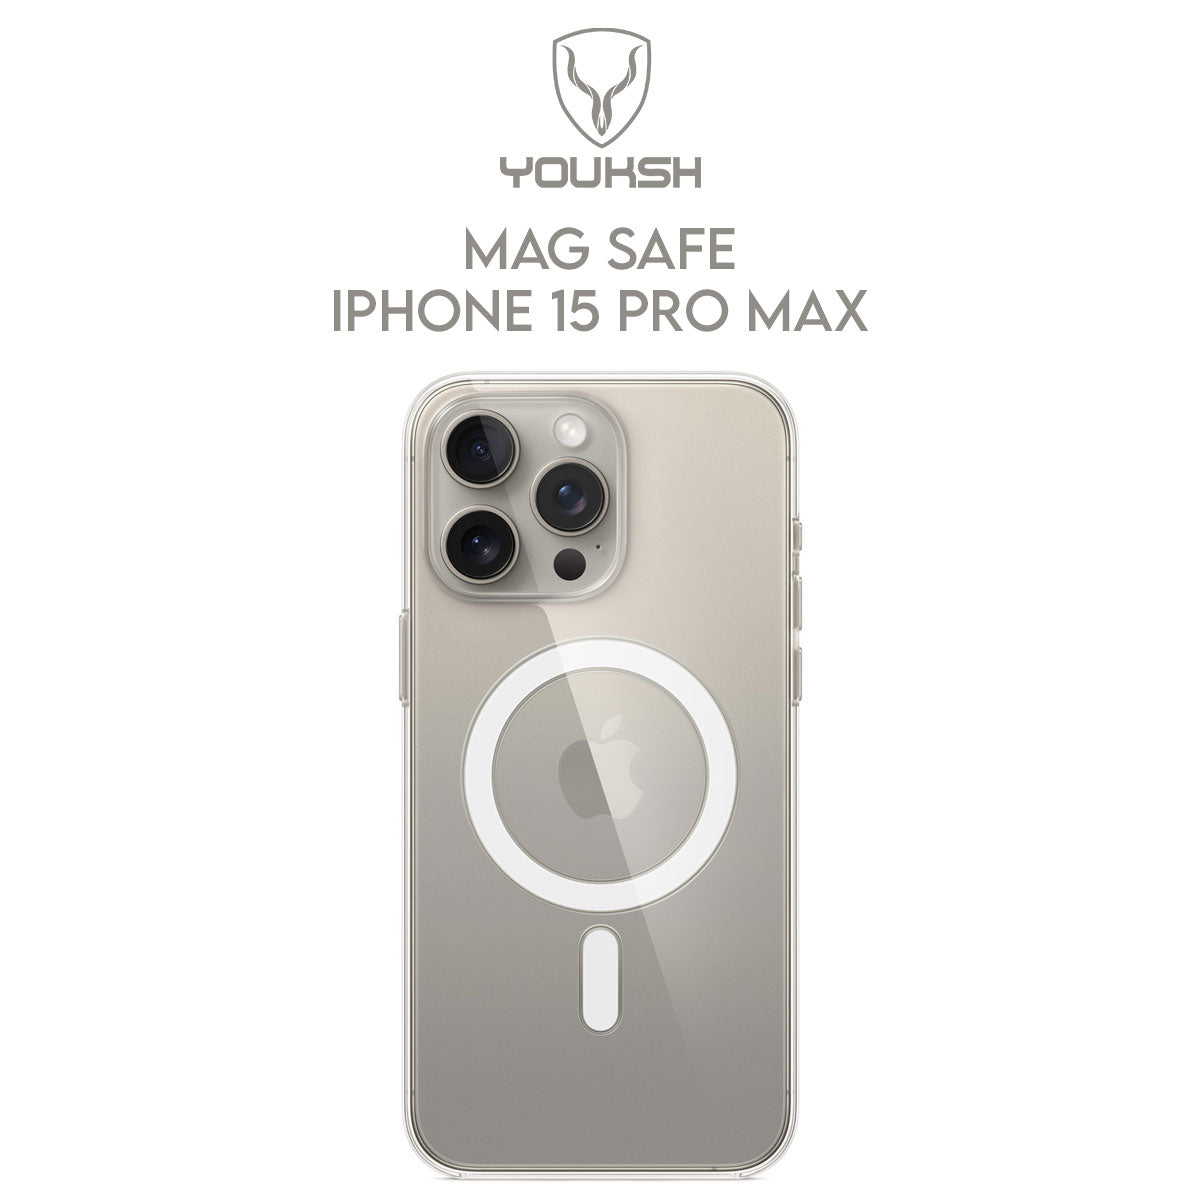 YOUKSH Mag Safe Case For IPHONE 15 Pro Max, Anti-Yellow Clear Case With Charging Compatible, Shock Proof With Built-In Air Bag.